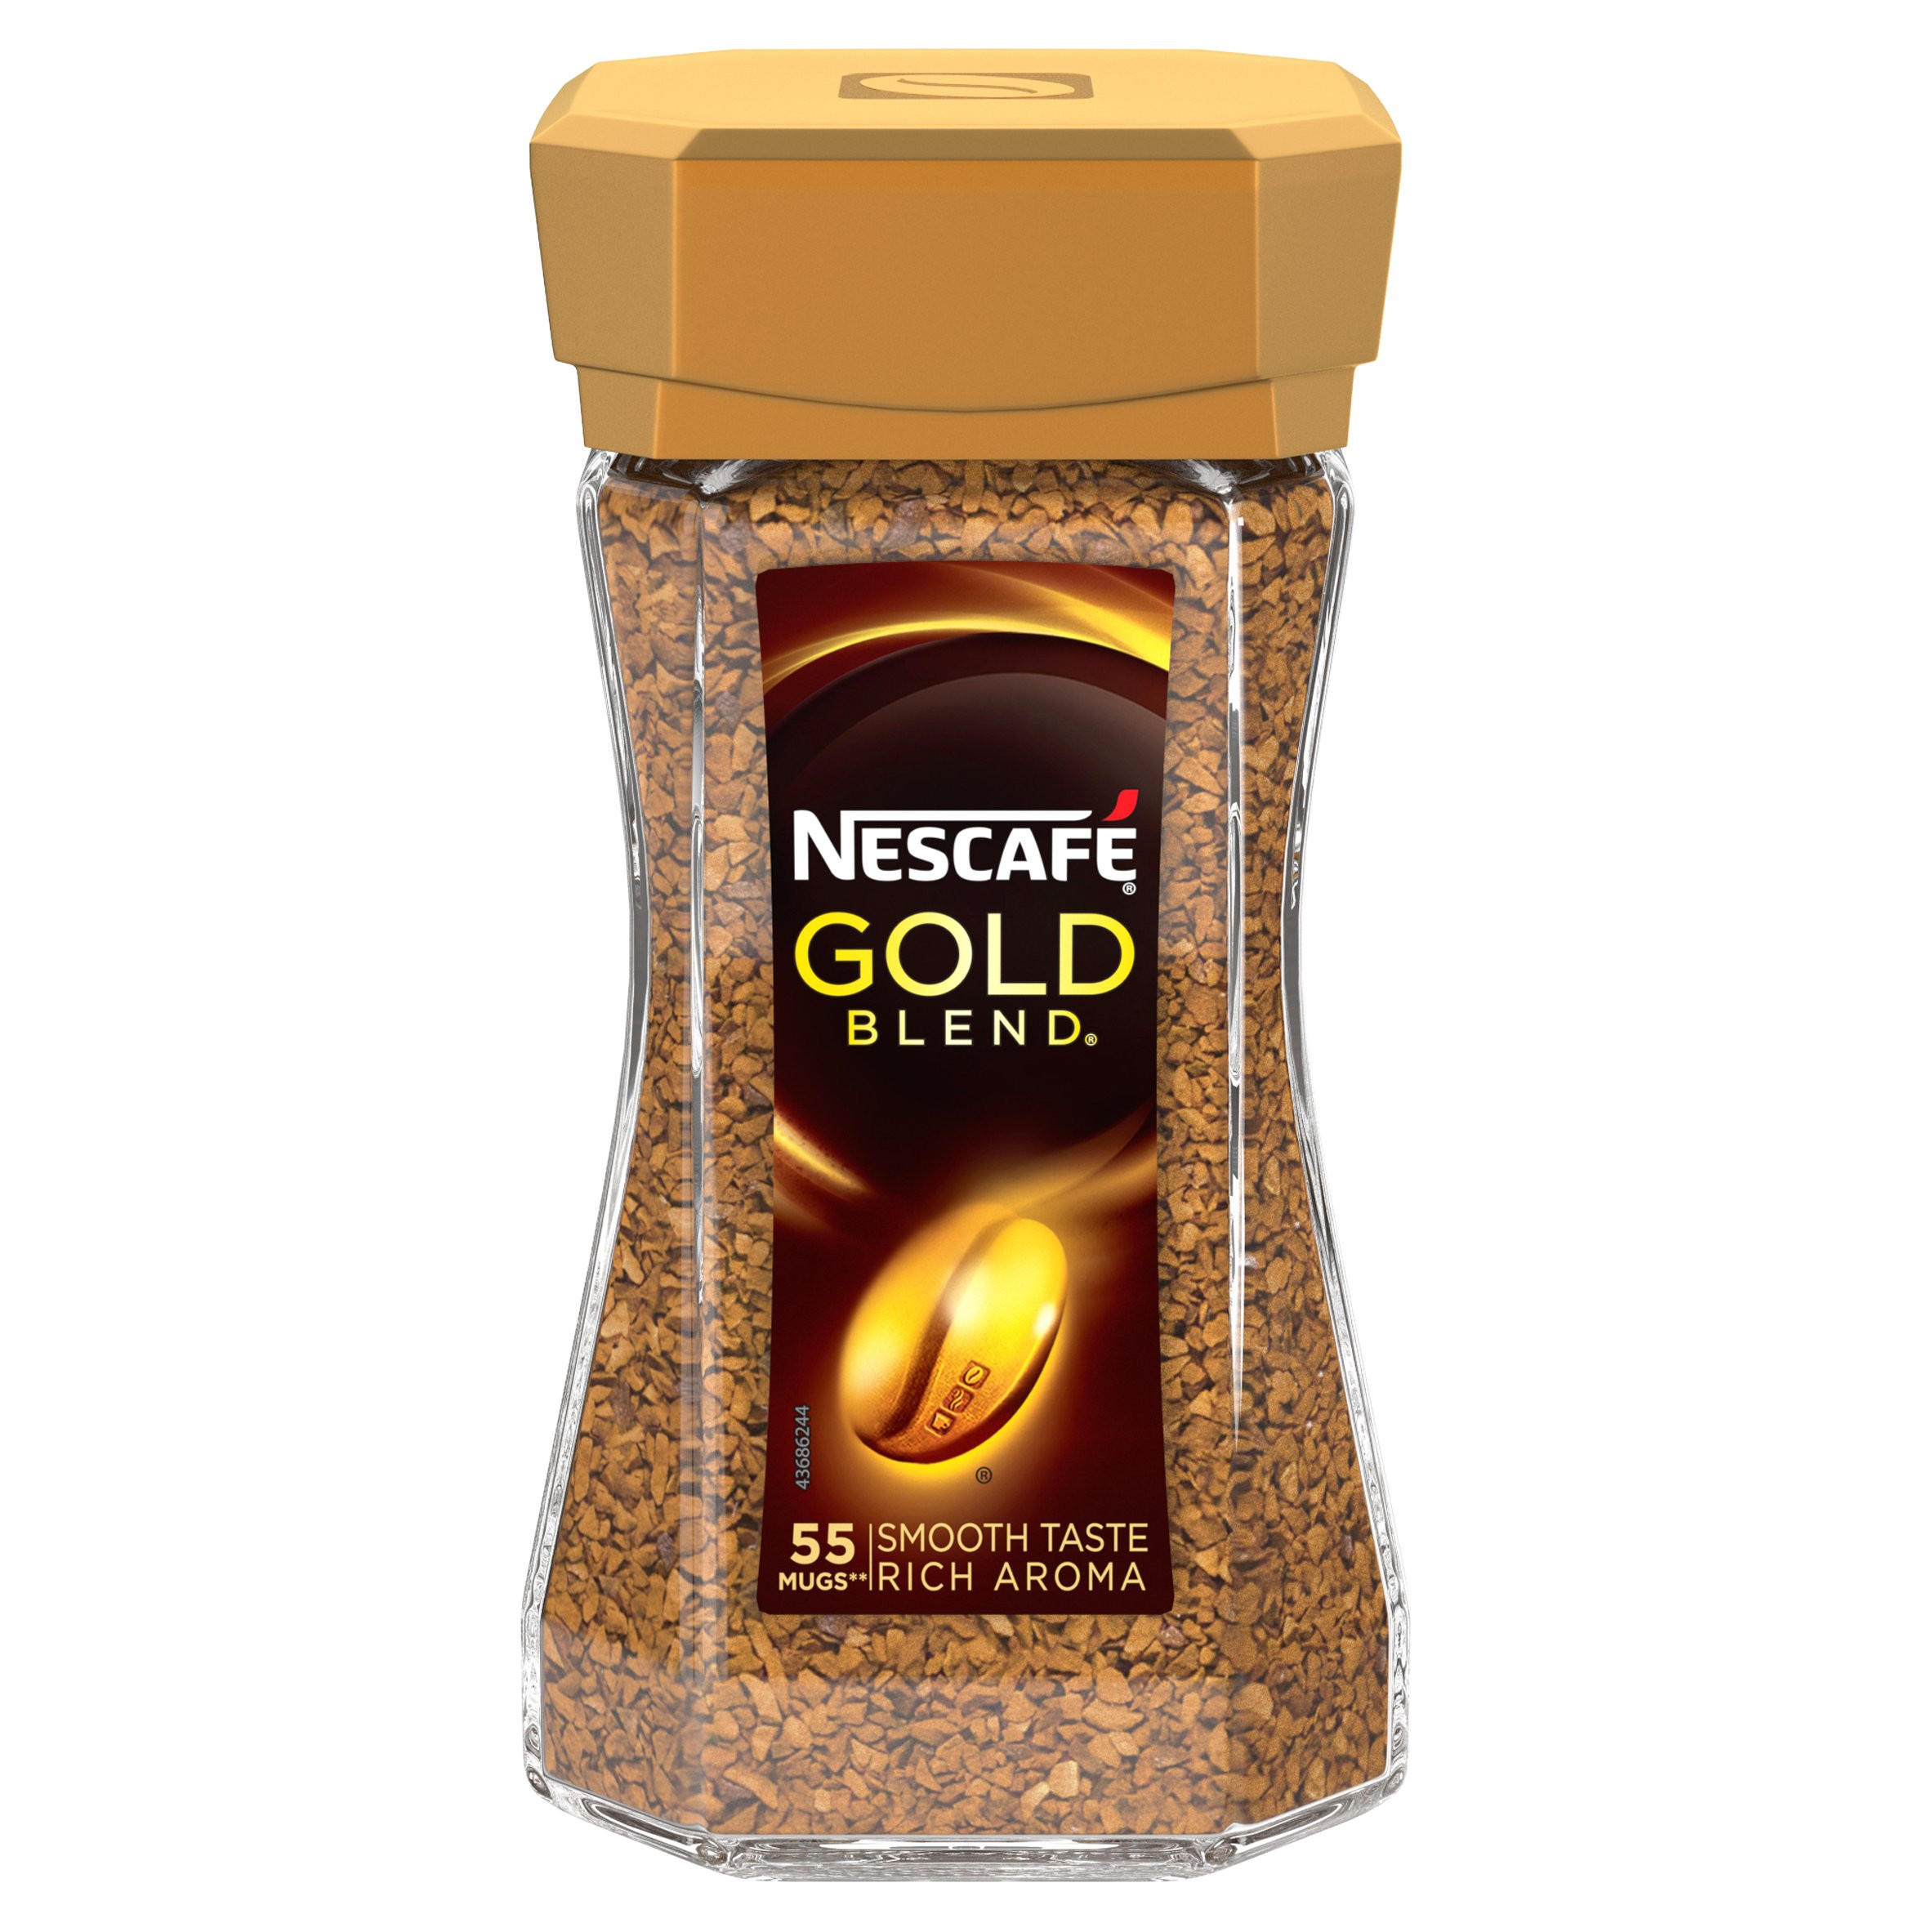 NESCAFE GOLD BLEND Instant Coffee 100g Instant & Ground